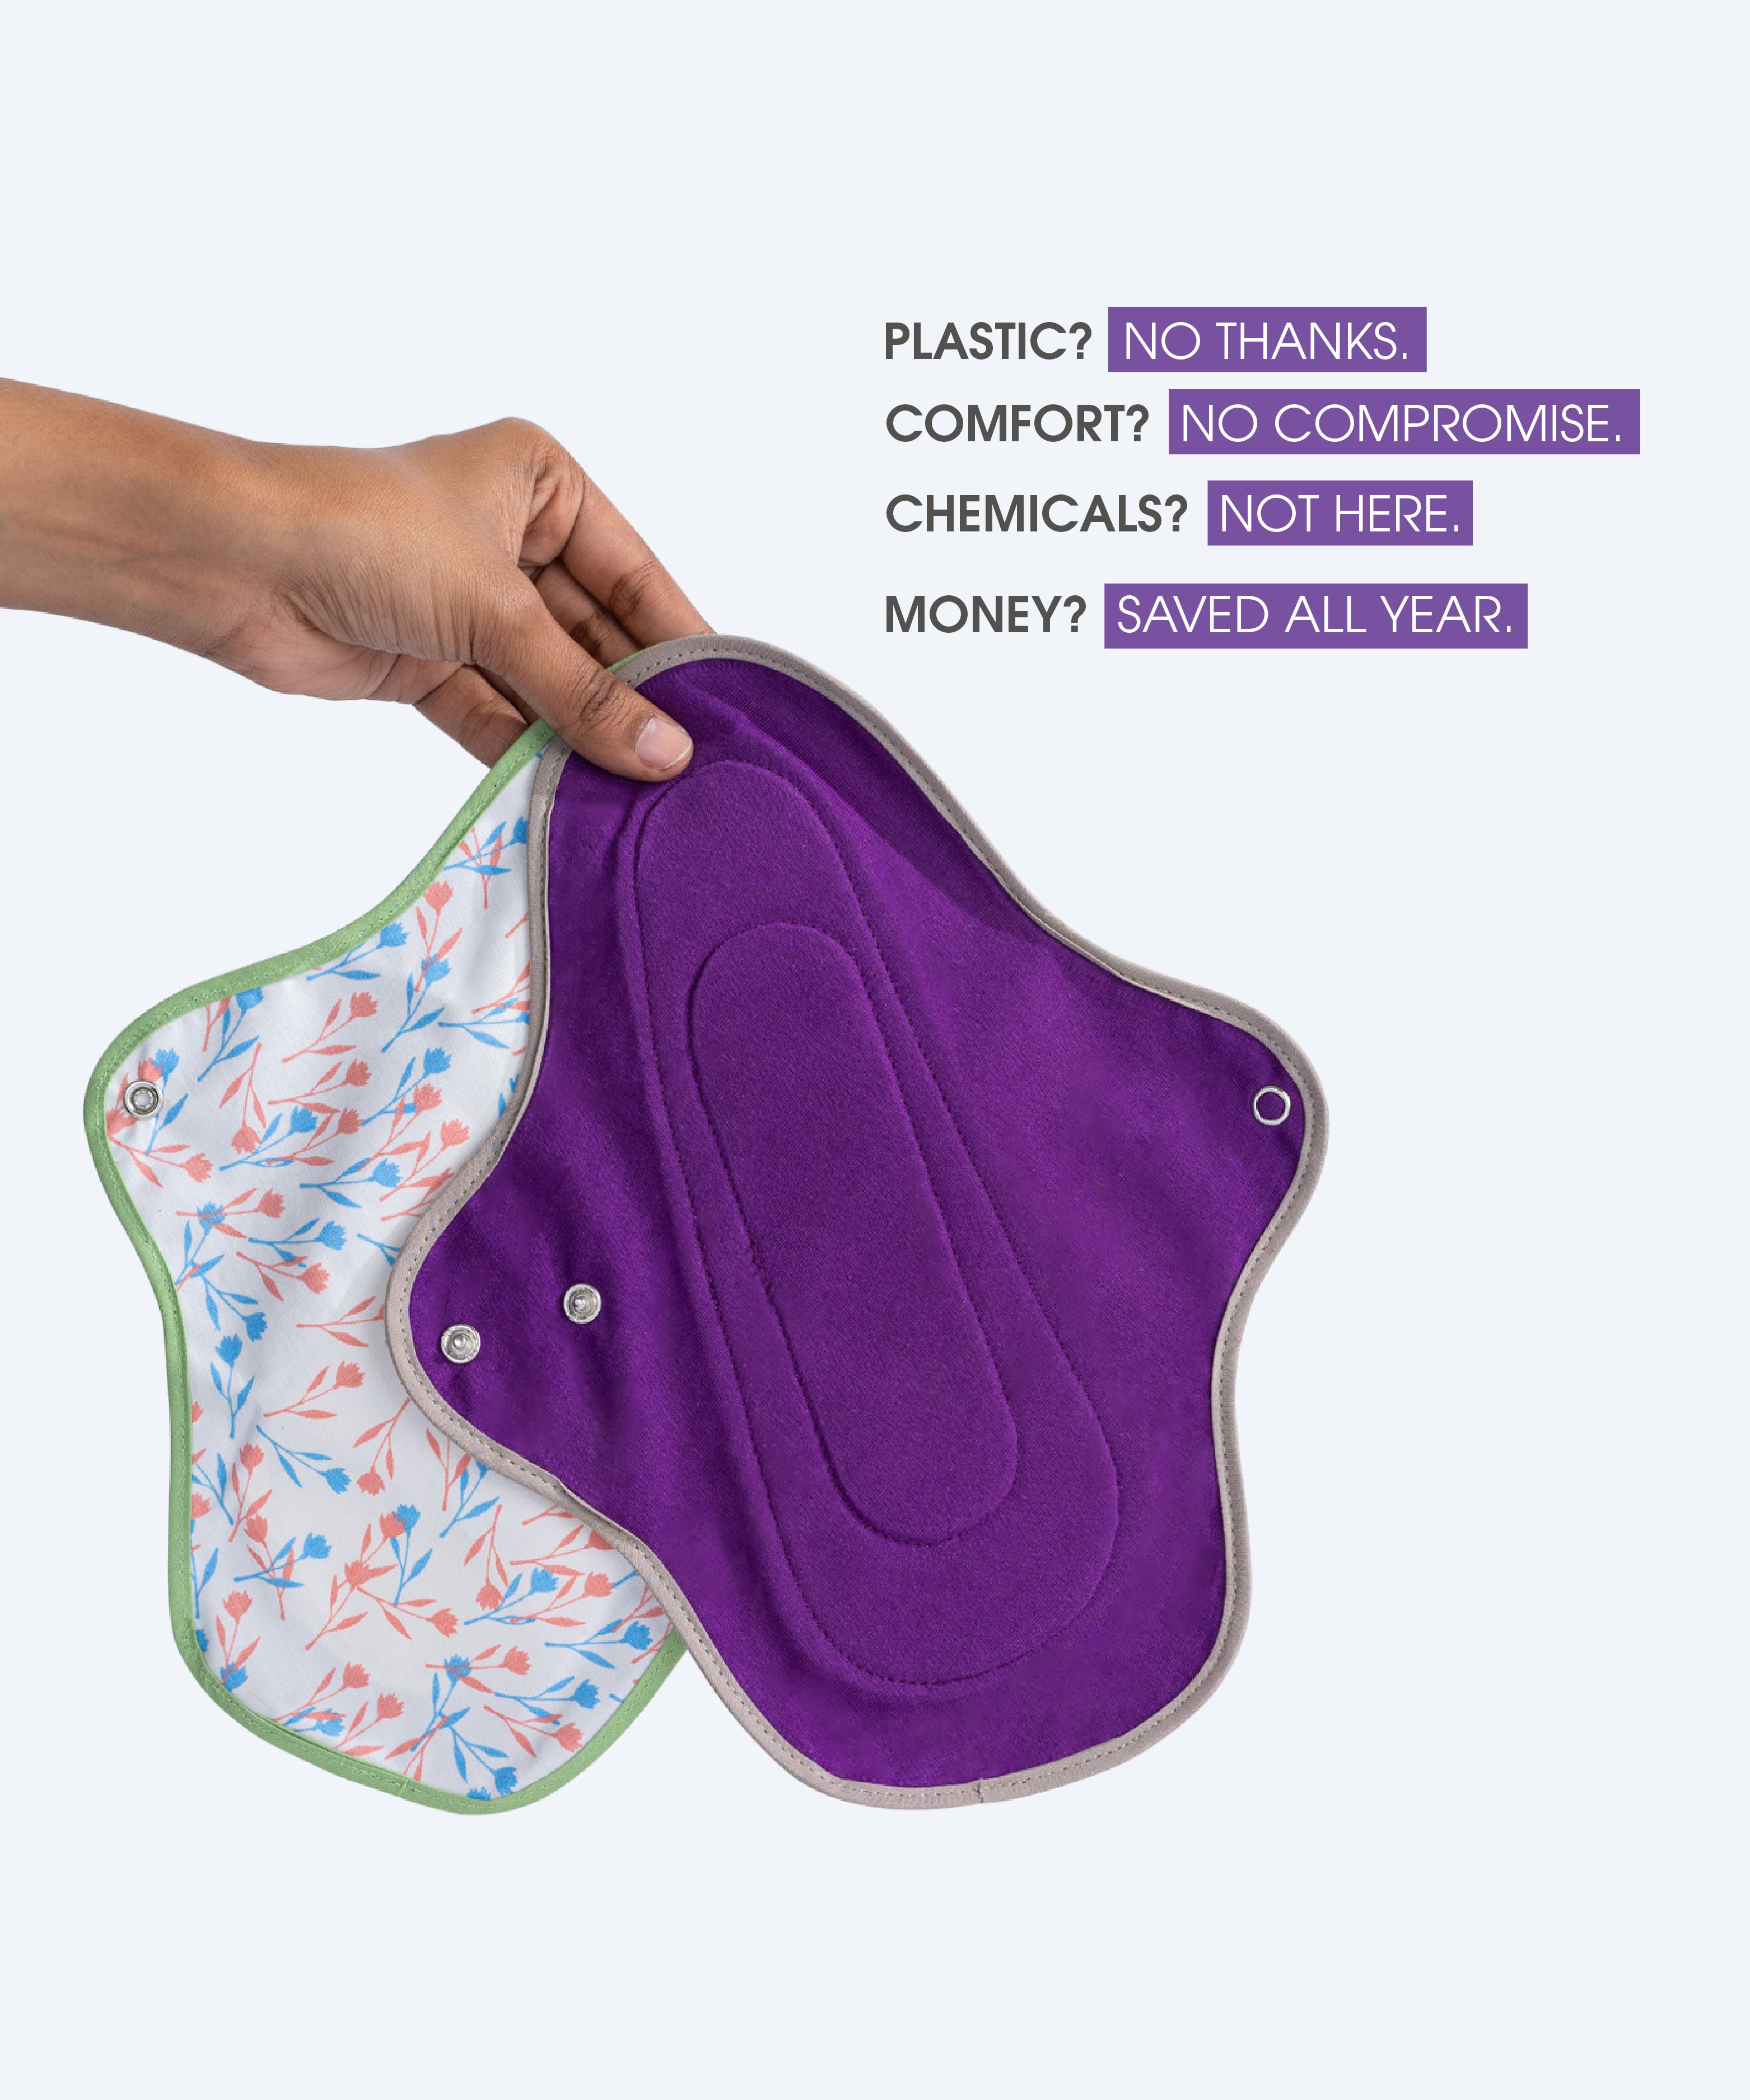 Rebelle Pads  Eco-Friendly Cloth Pads for Sustainable Period Care